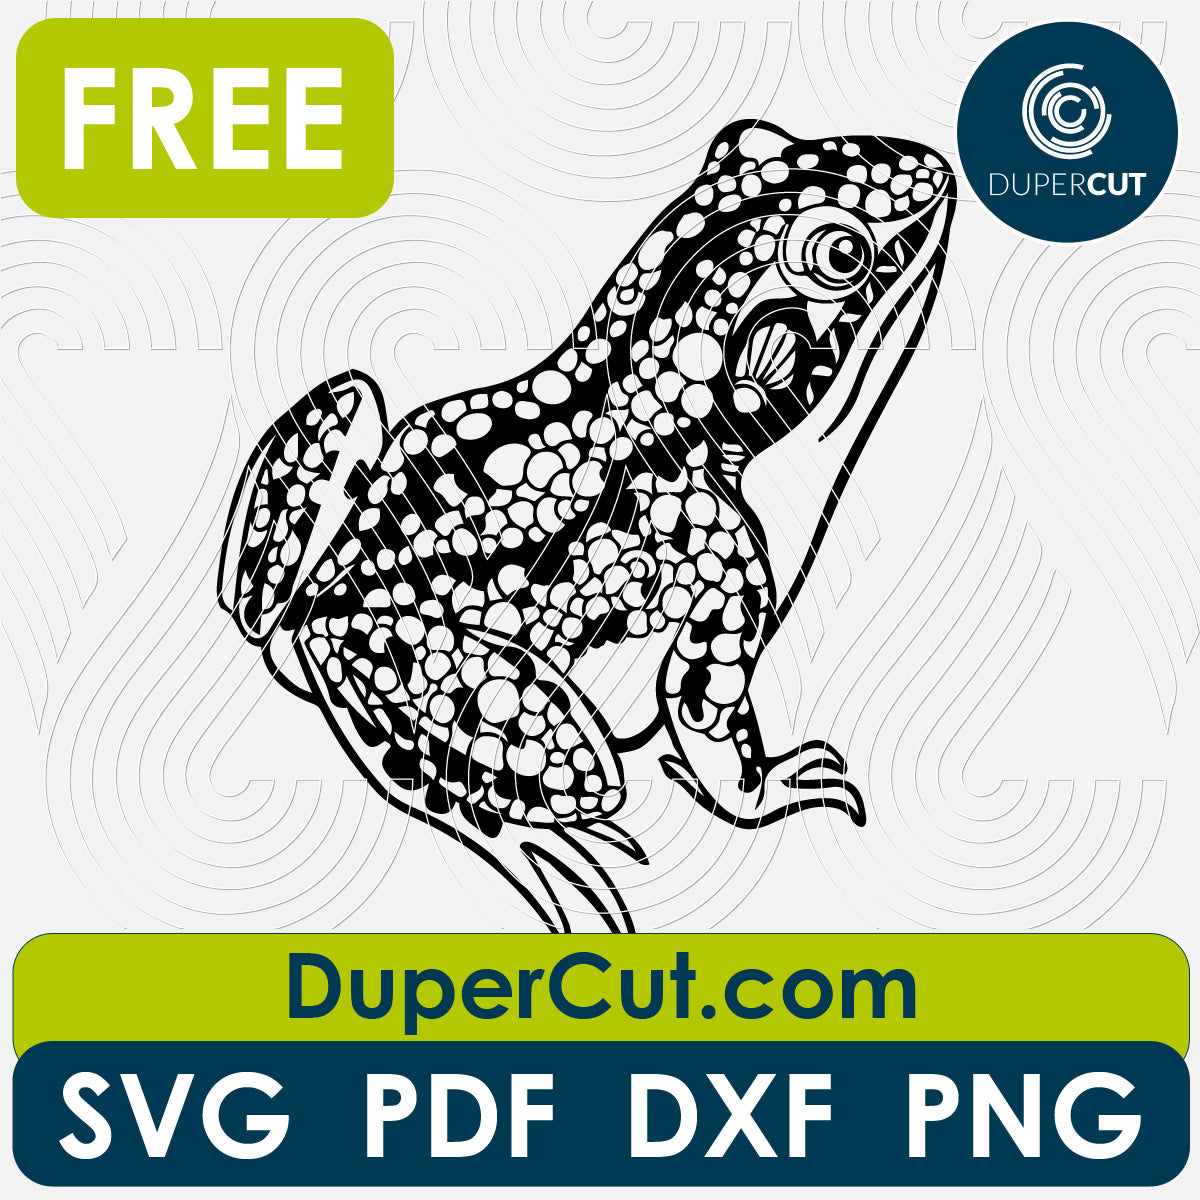 Frog toad free cutting template SVG PNG DXF files for Glowforge, Cricut, Silhouette, CNC laser router by DuperCut.com